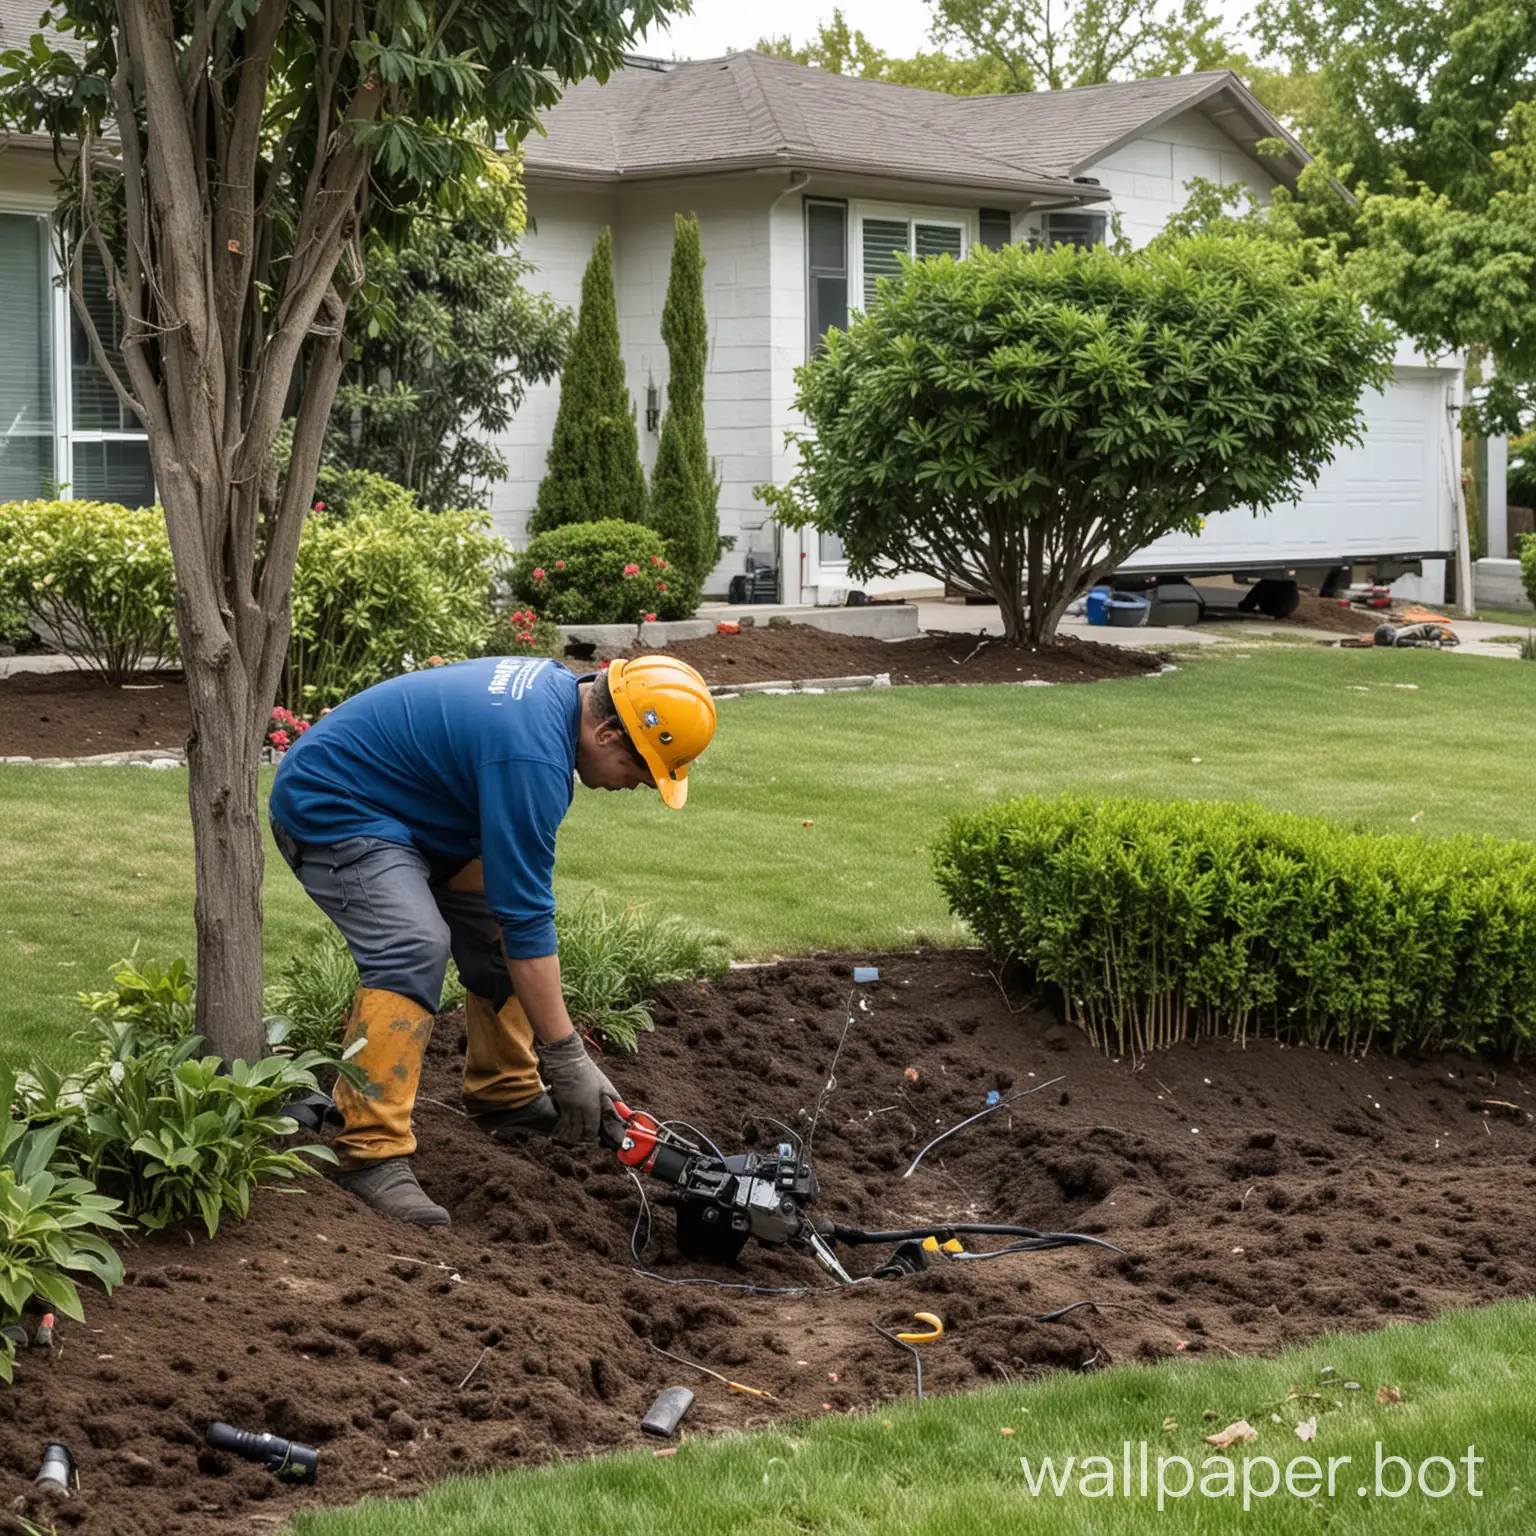 Fiber-Optic-Technician-Digging-for-Cables-in-Front-Yard